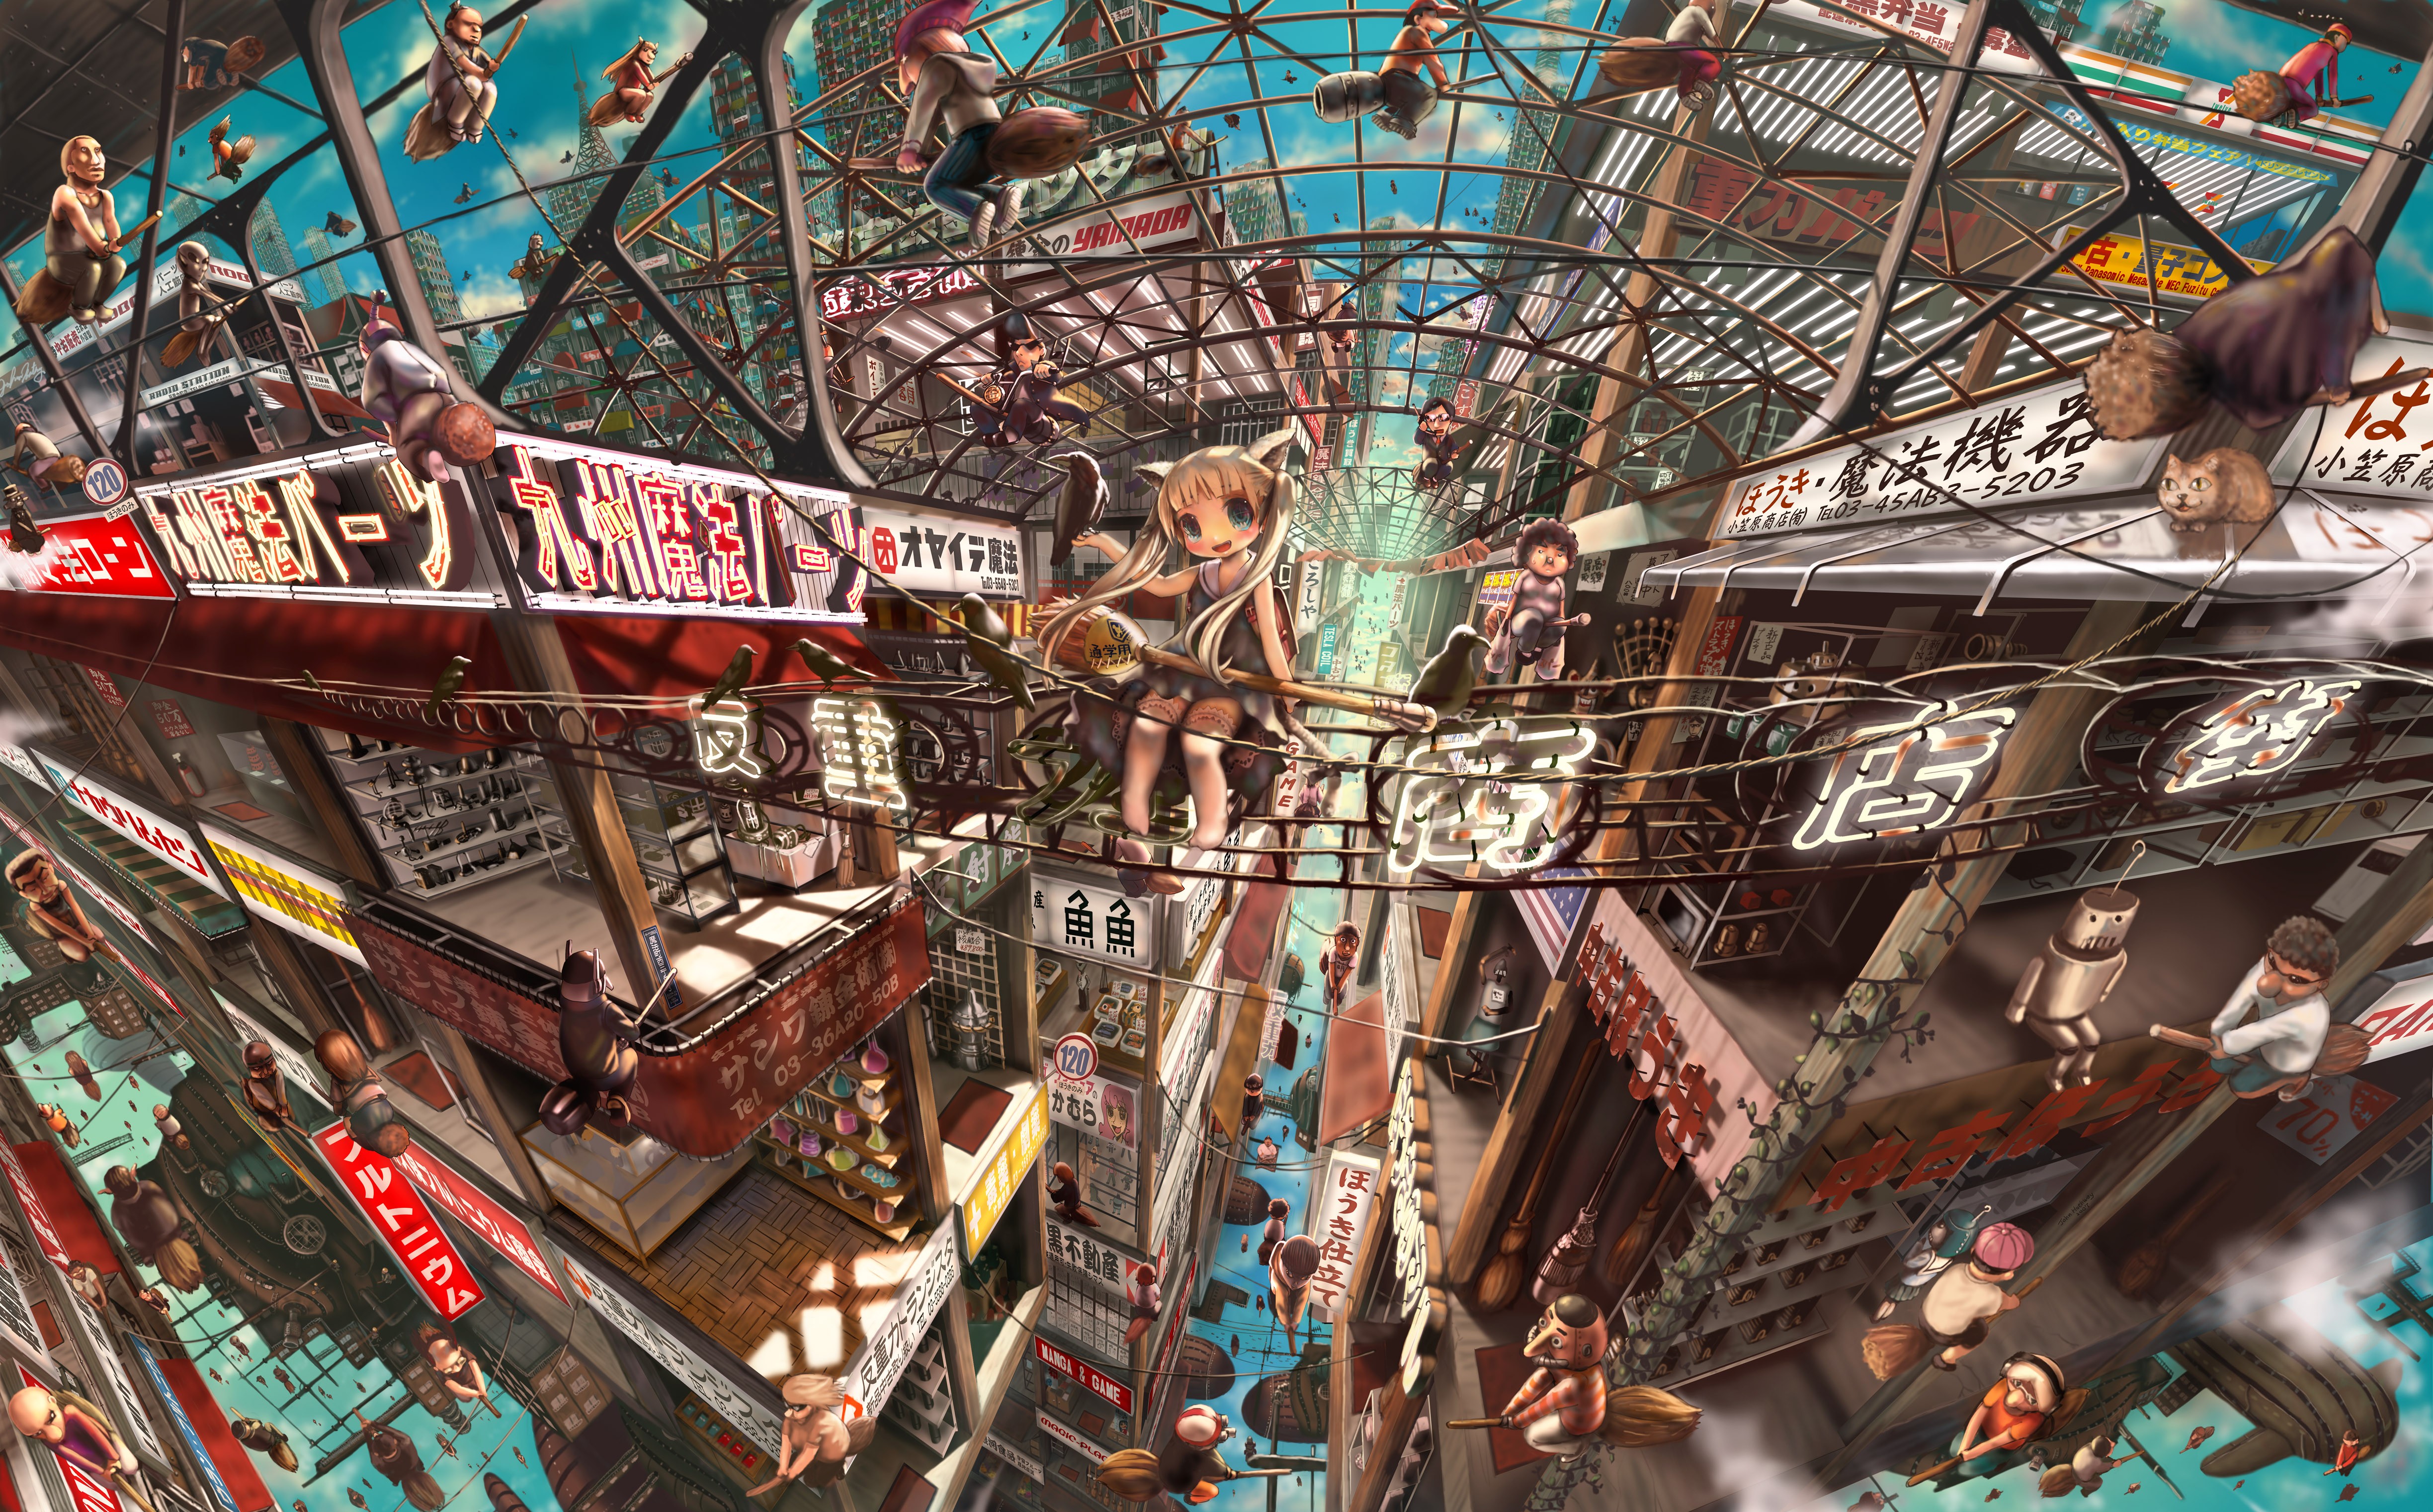 cityscapes, Twintails, Scenic, John, Hathway, Anime, Girls, Cities Wallpaper